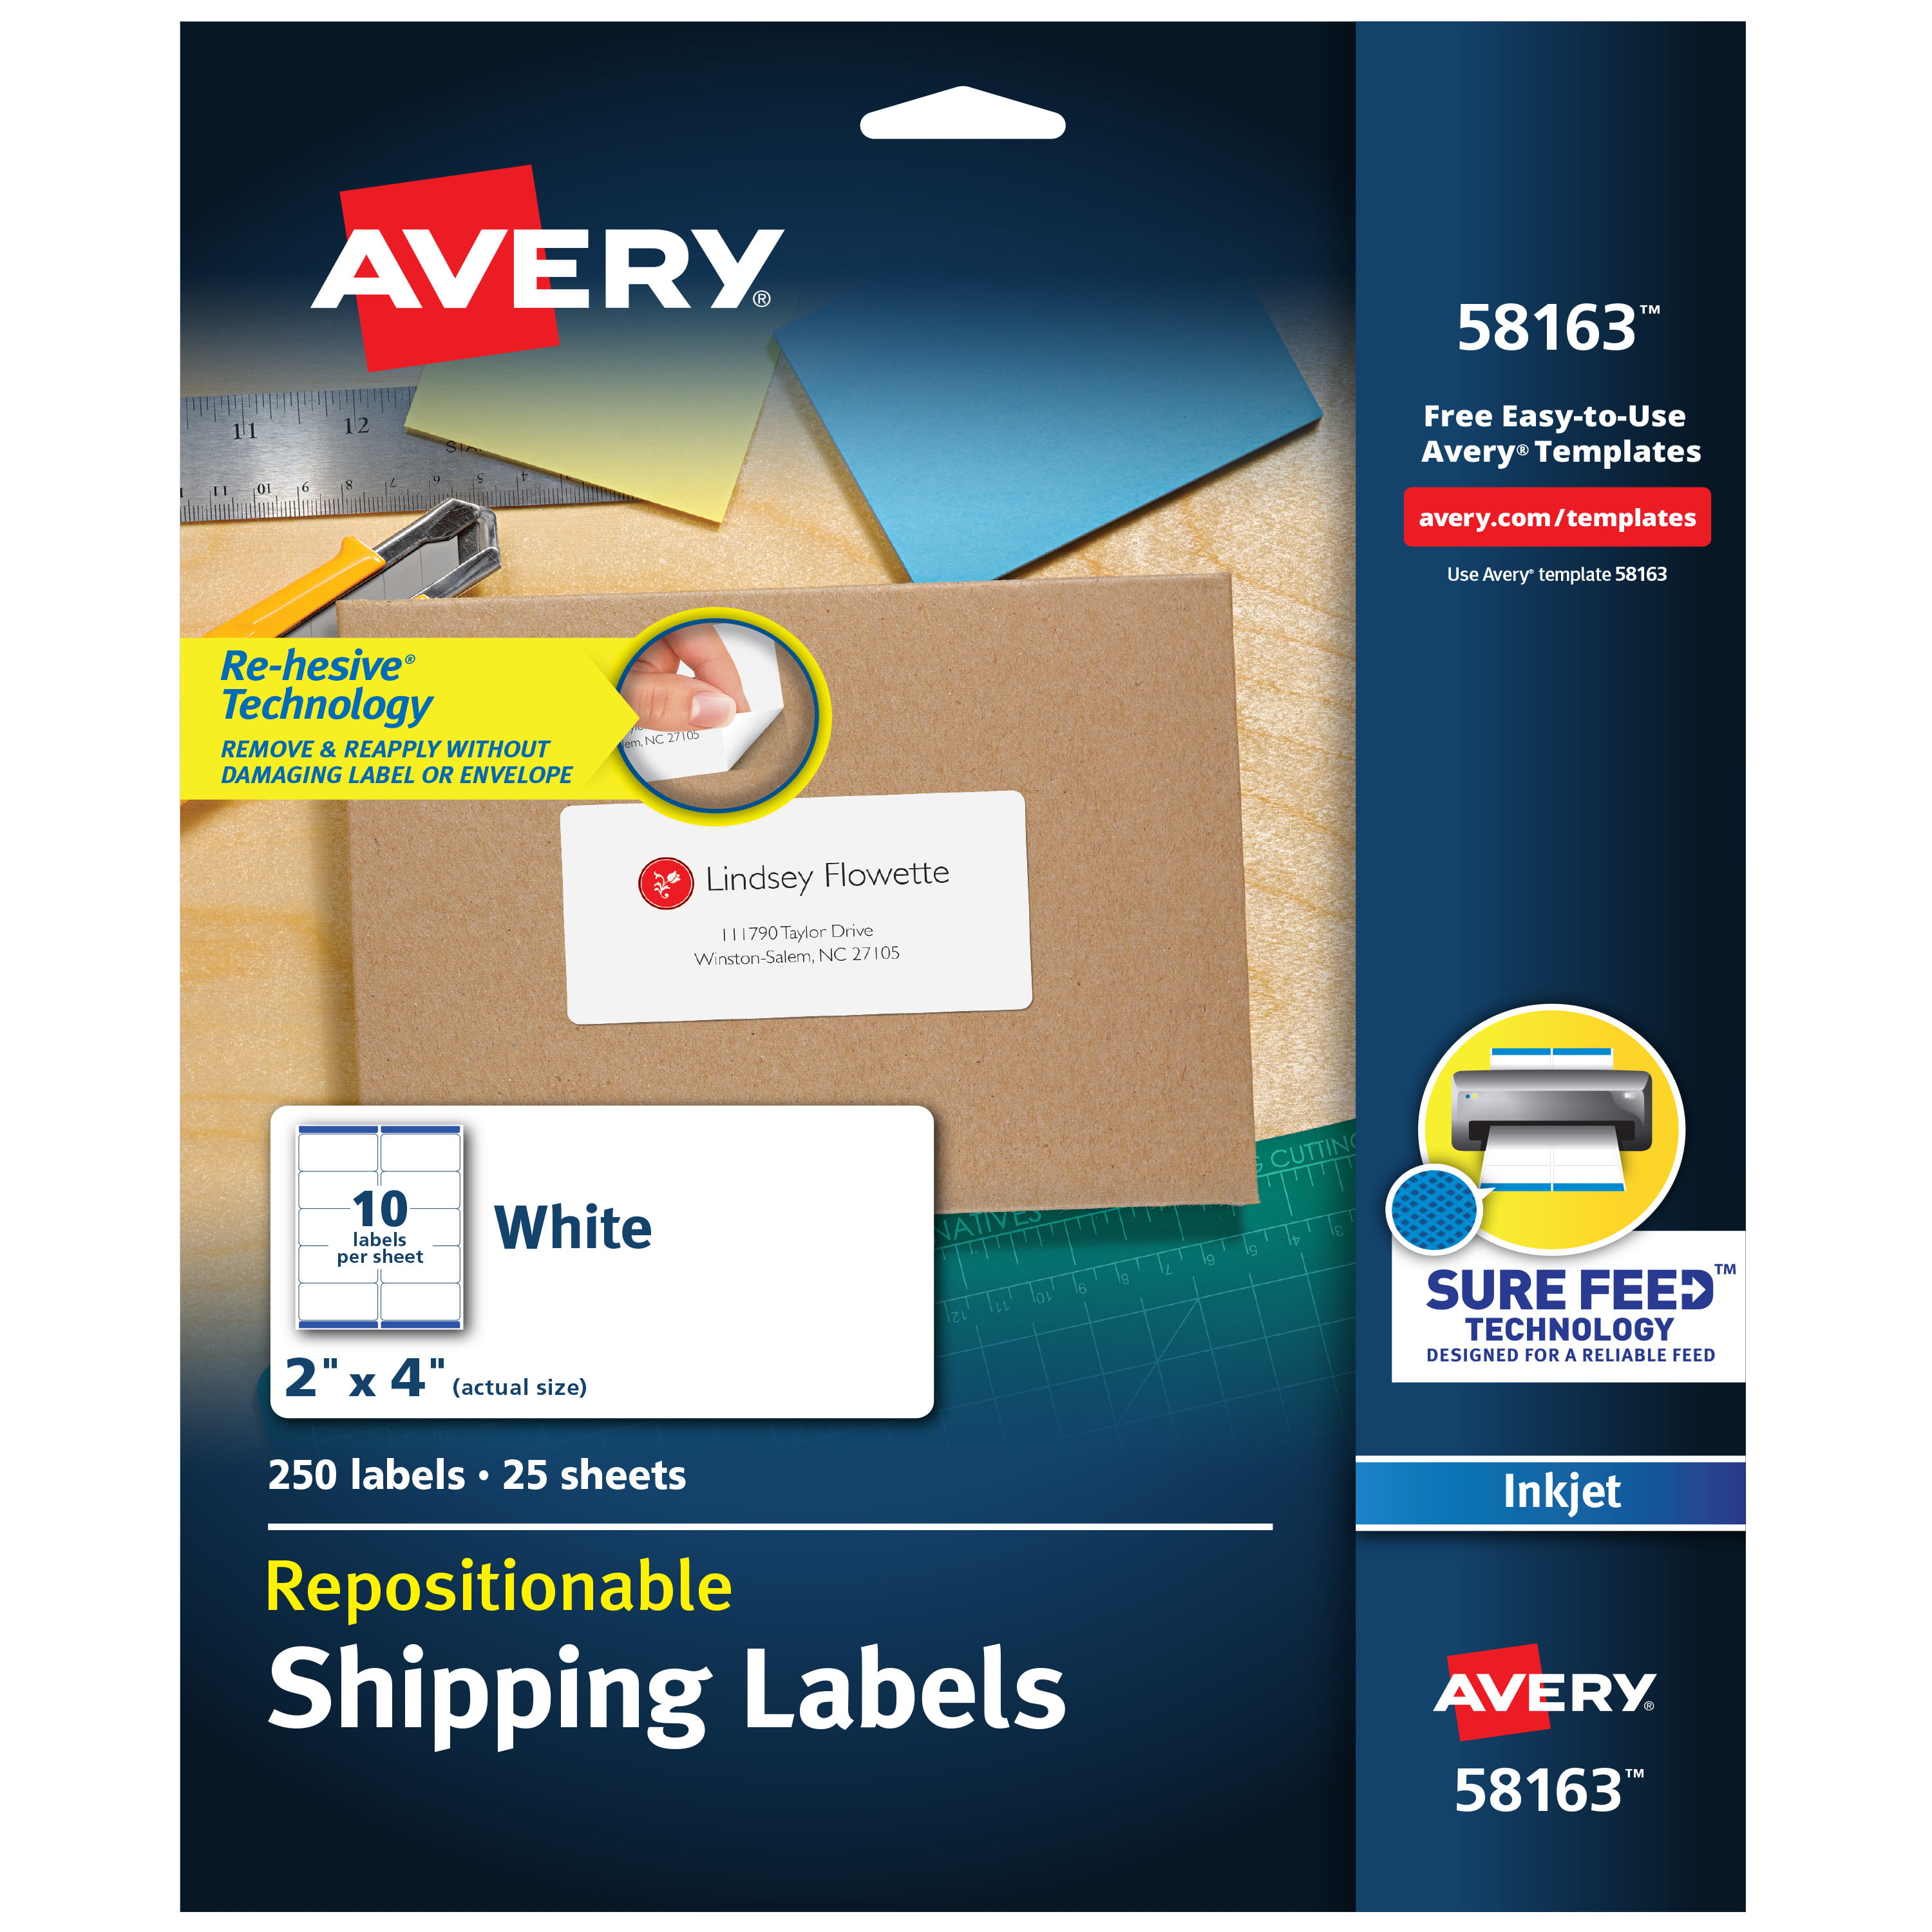 avery-postcard-template-3381-best-of-avery-4x6-postcard-template-image